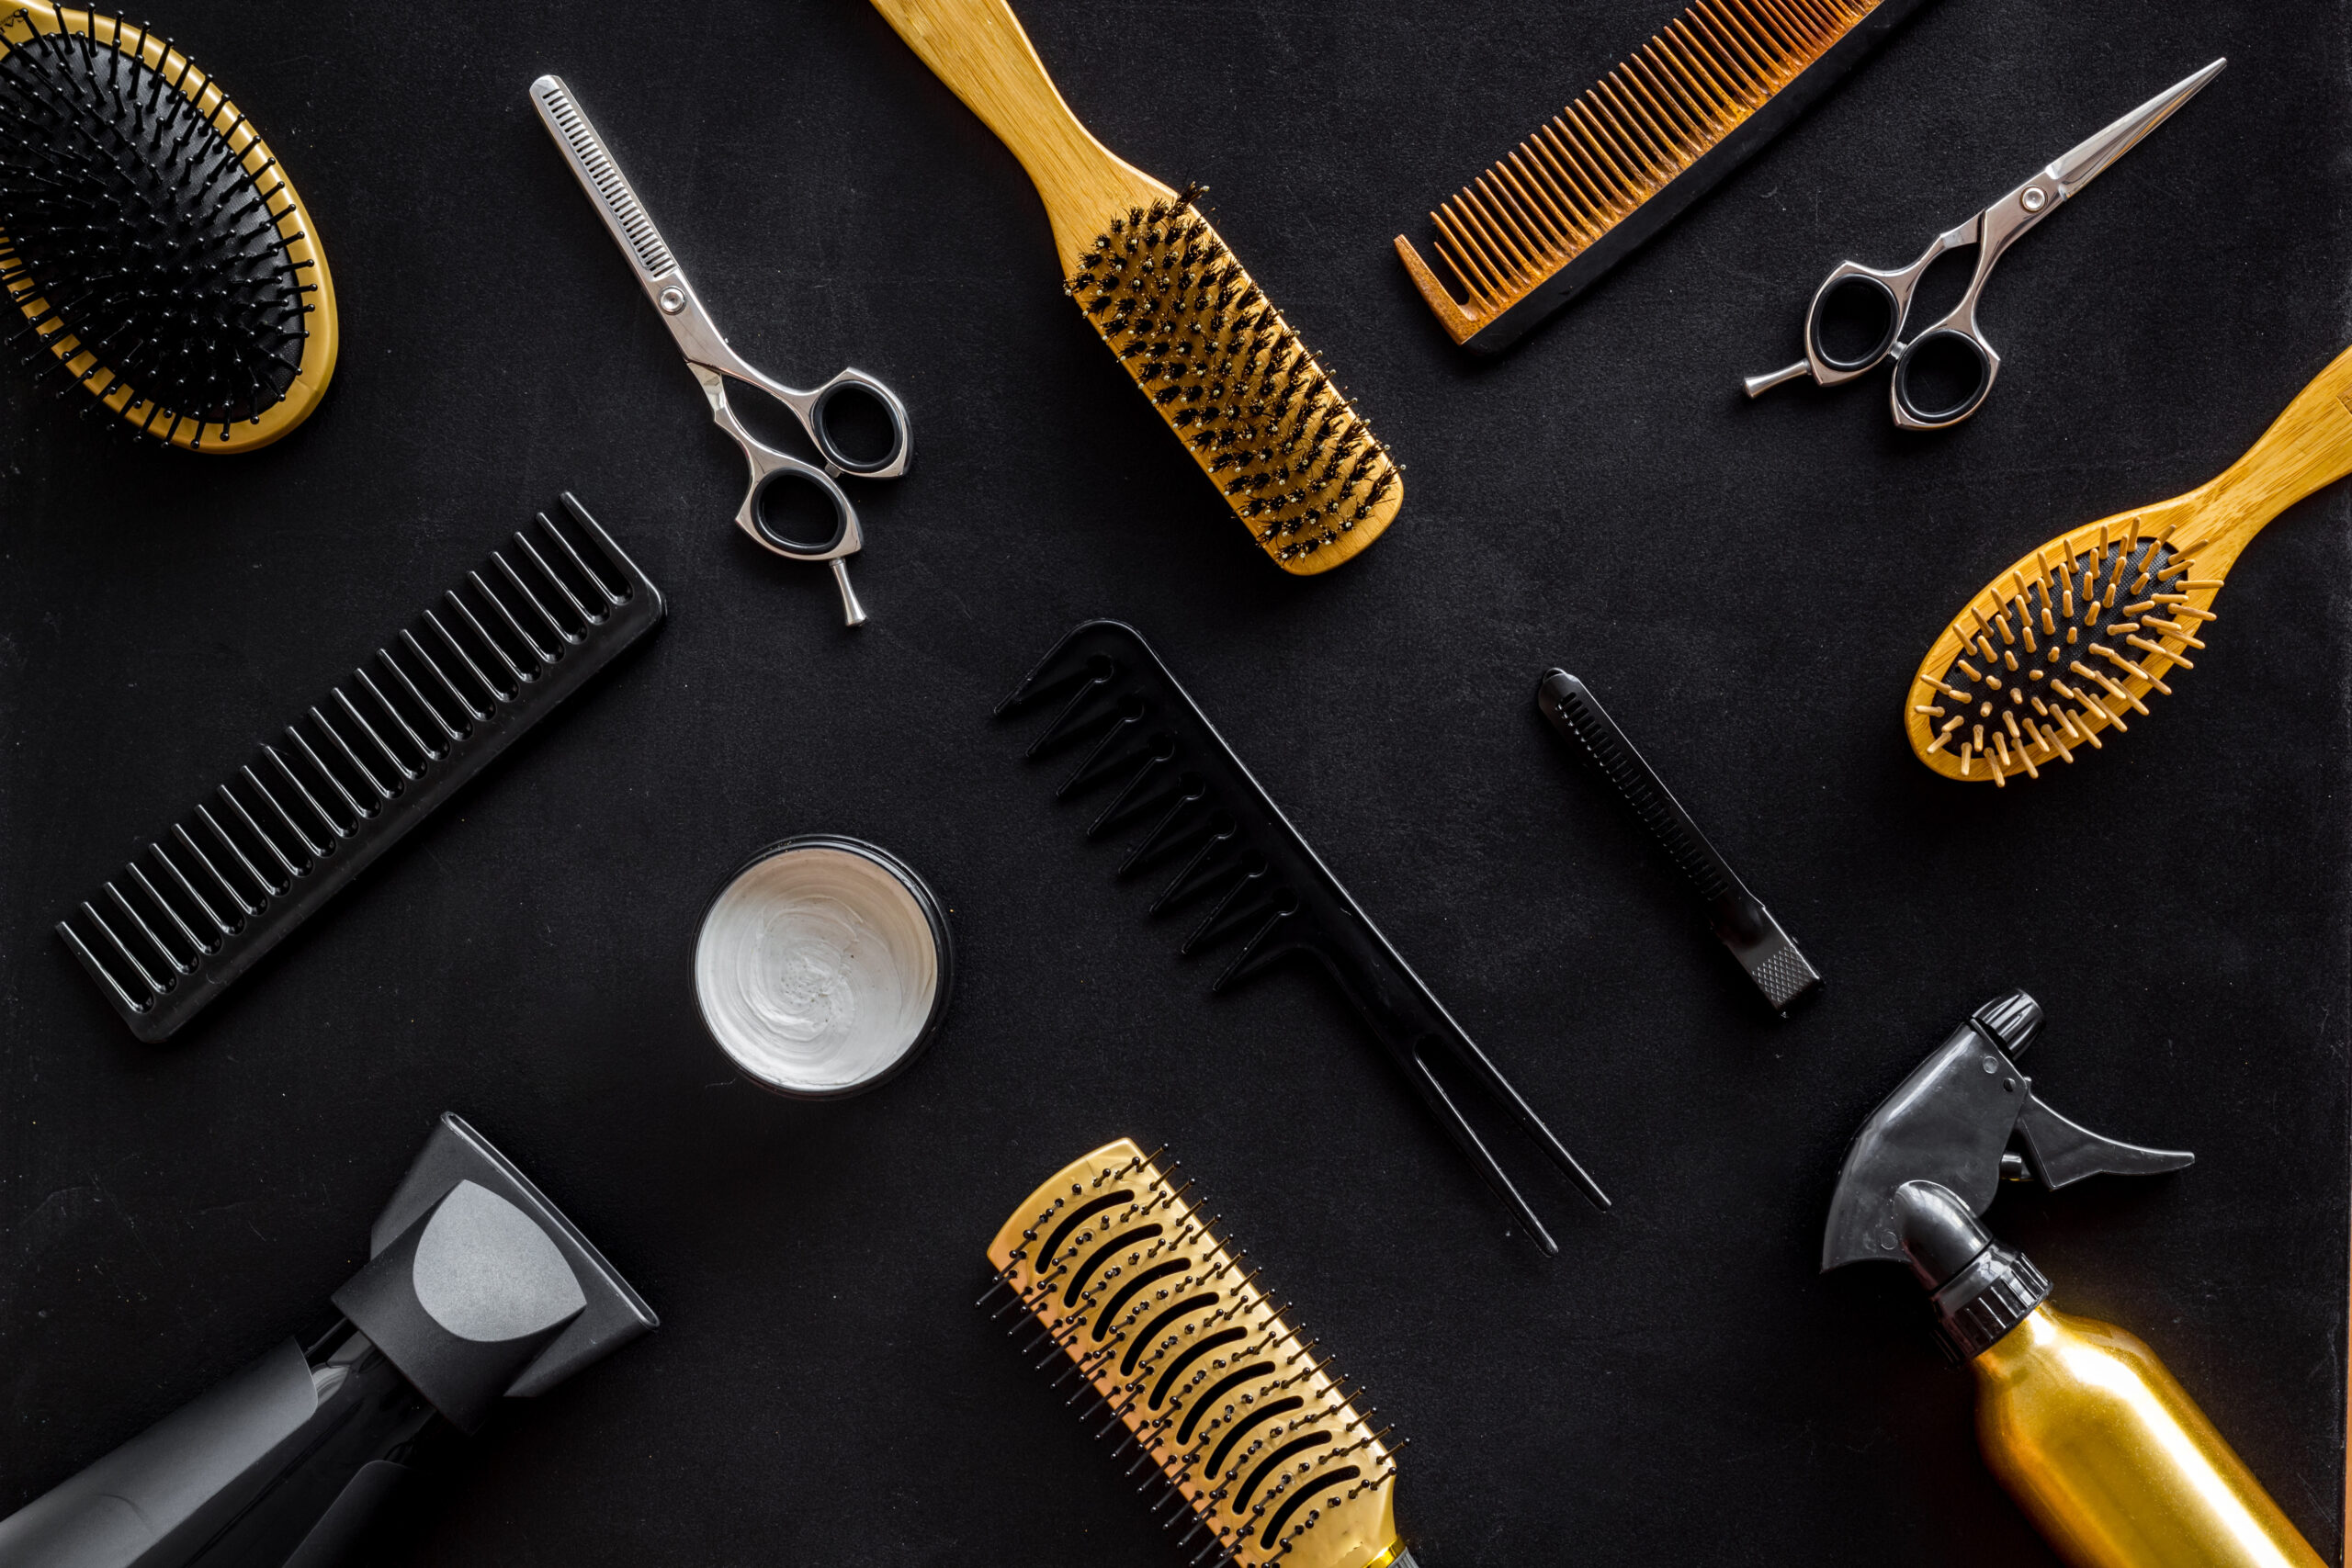 square photo of various hair dresser tools on a black background.